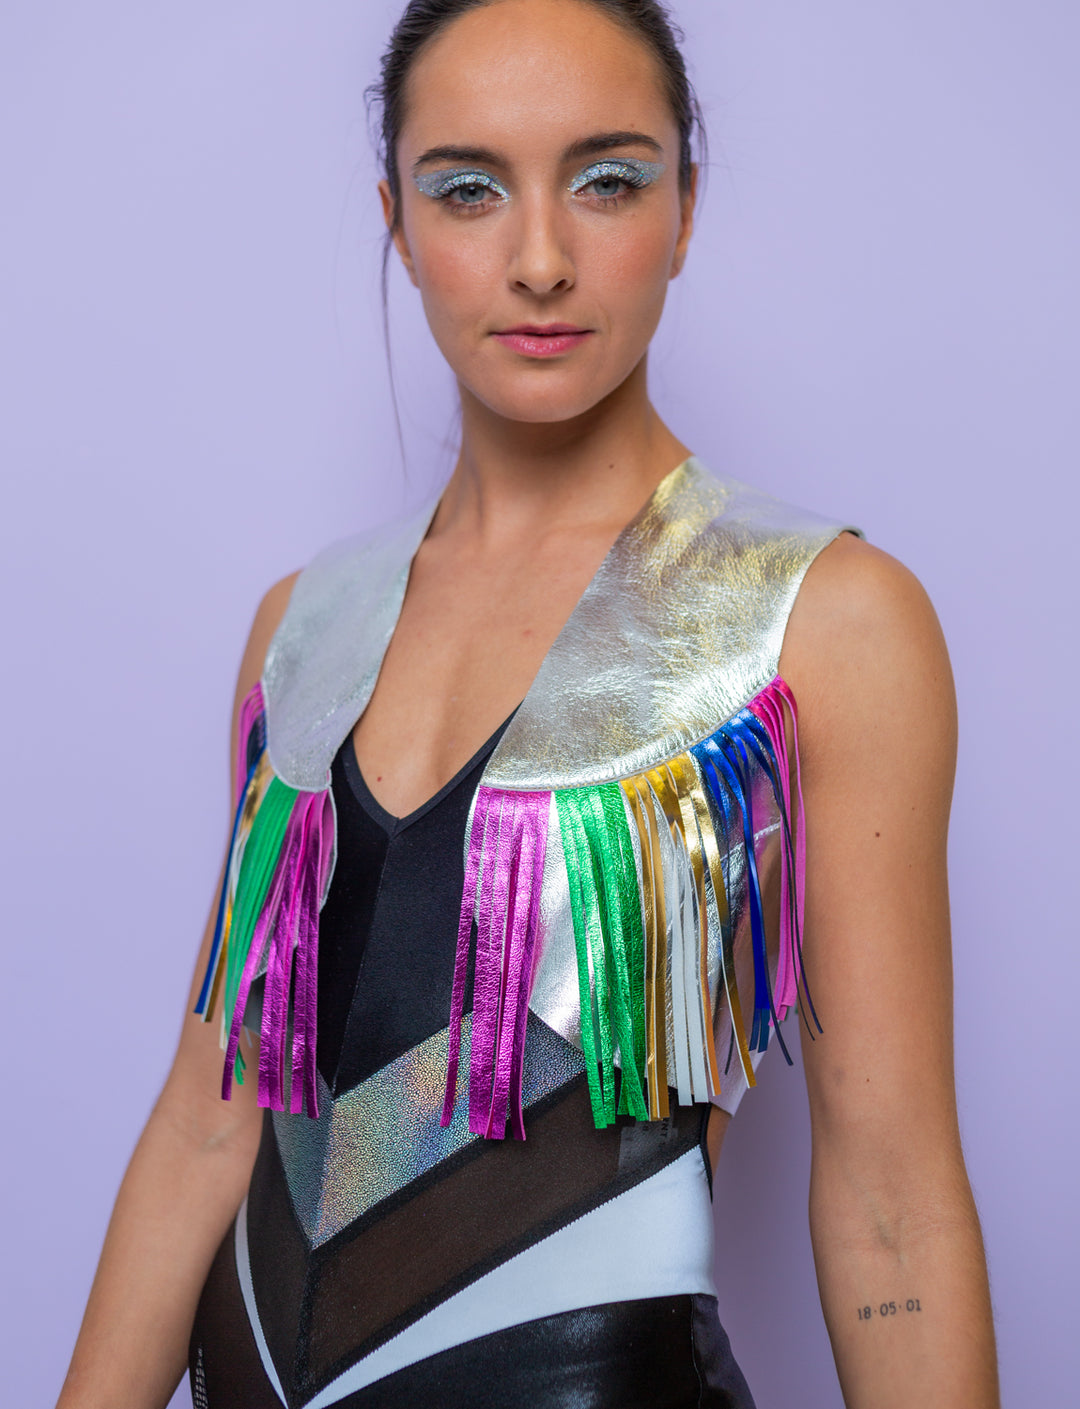 Woman wearing a silver leather jacket with multi coloured fringing and a black lycra catsuit